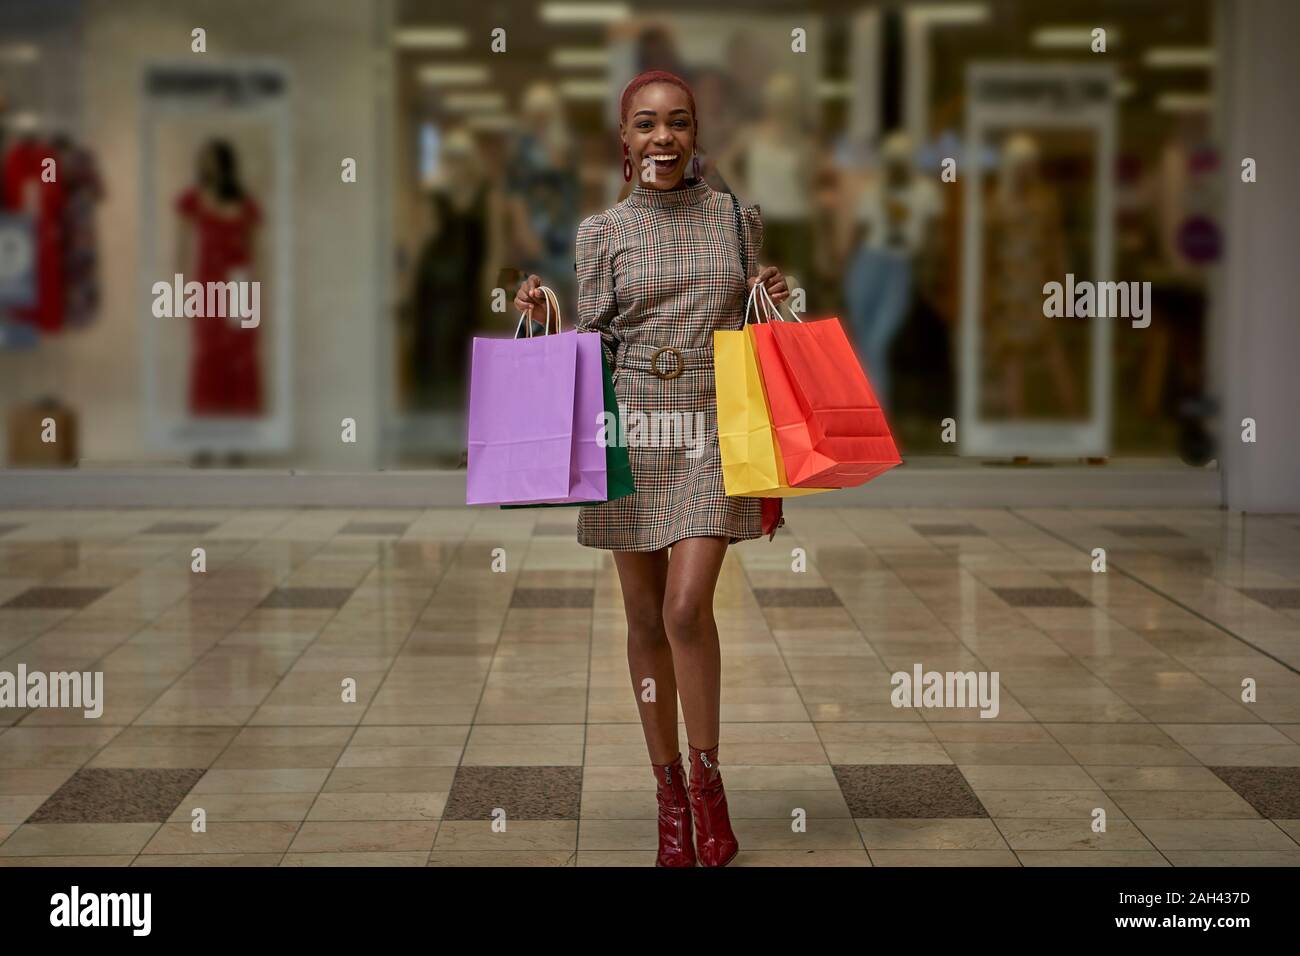 Happy young woman holding colorful shopping bags walking outside a shop Stock Photo